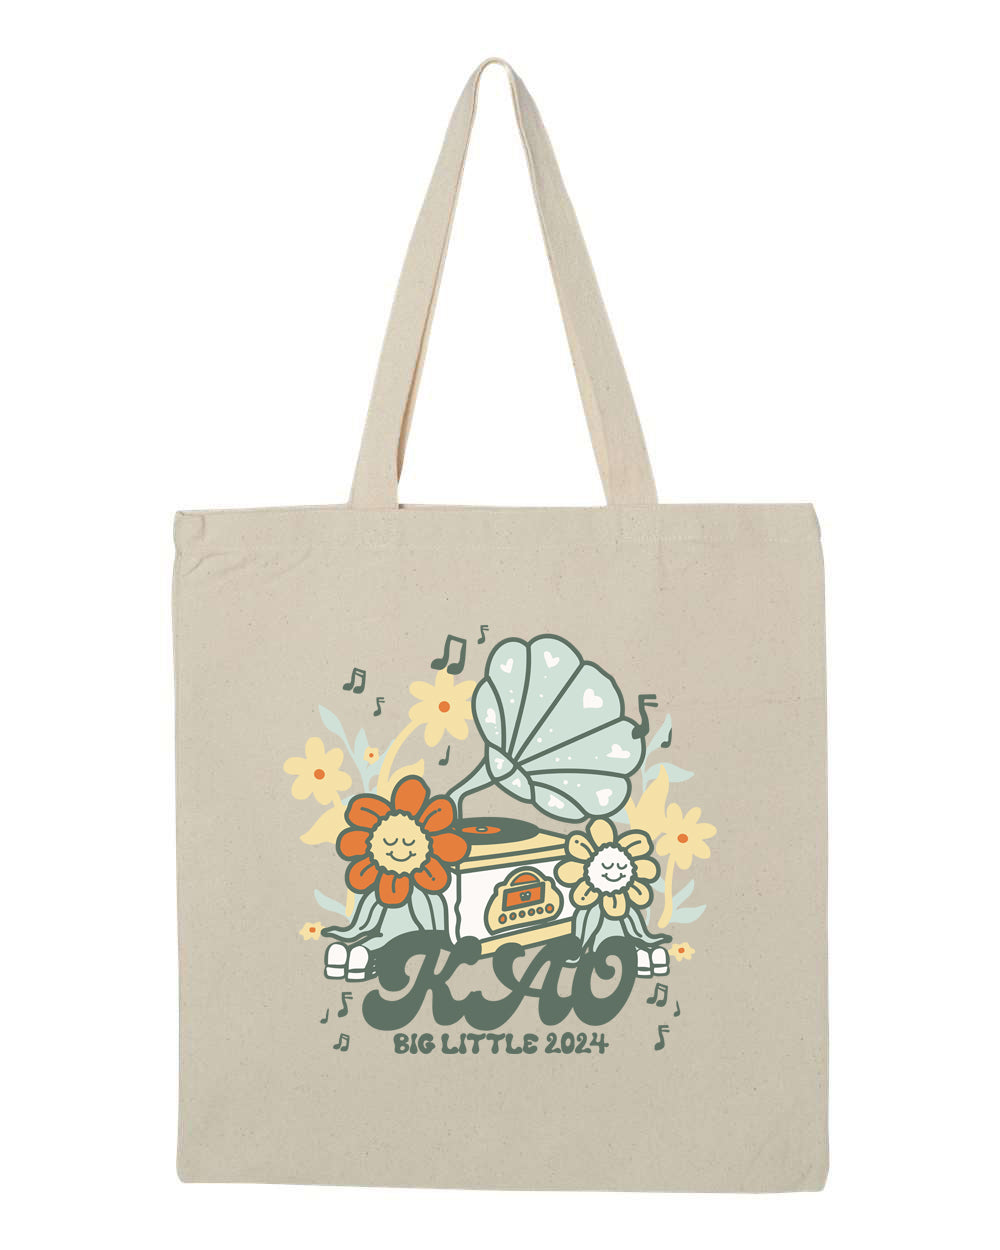 a tote bag with an image of a baby stroller